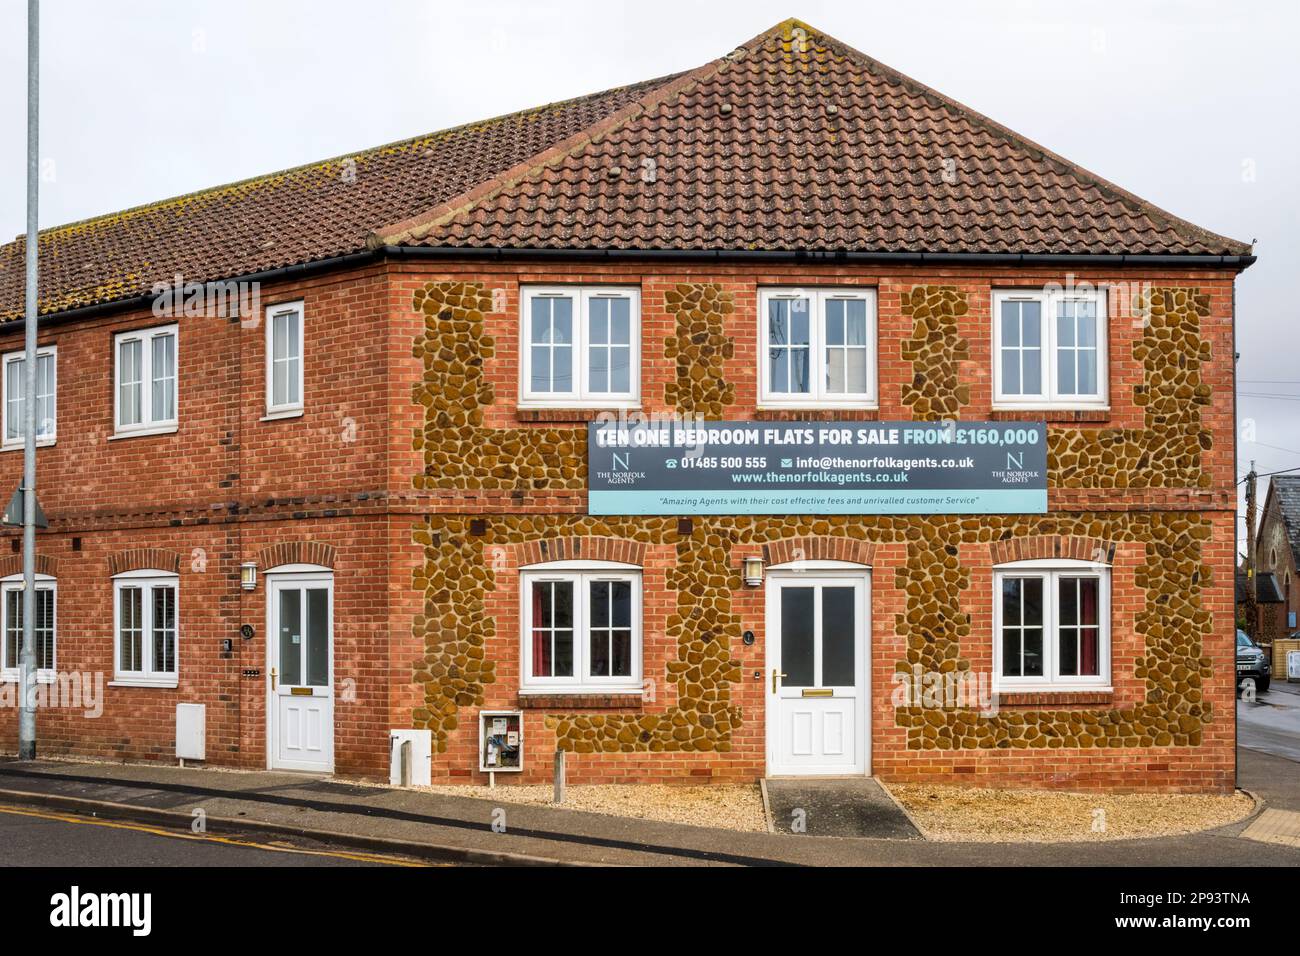 Ten One Bedroom Flats For Sale sign on building in Norfolk village. Stock Photo